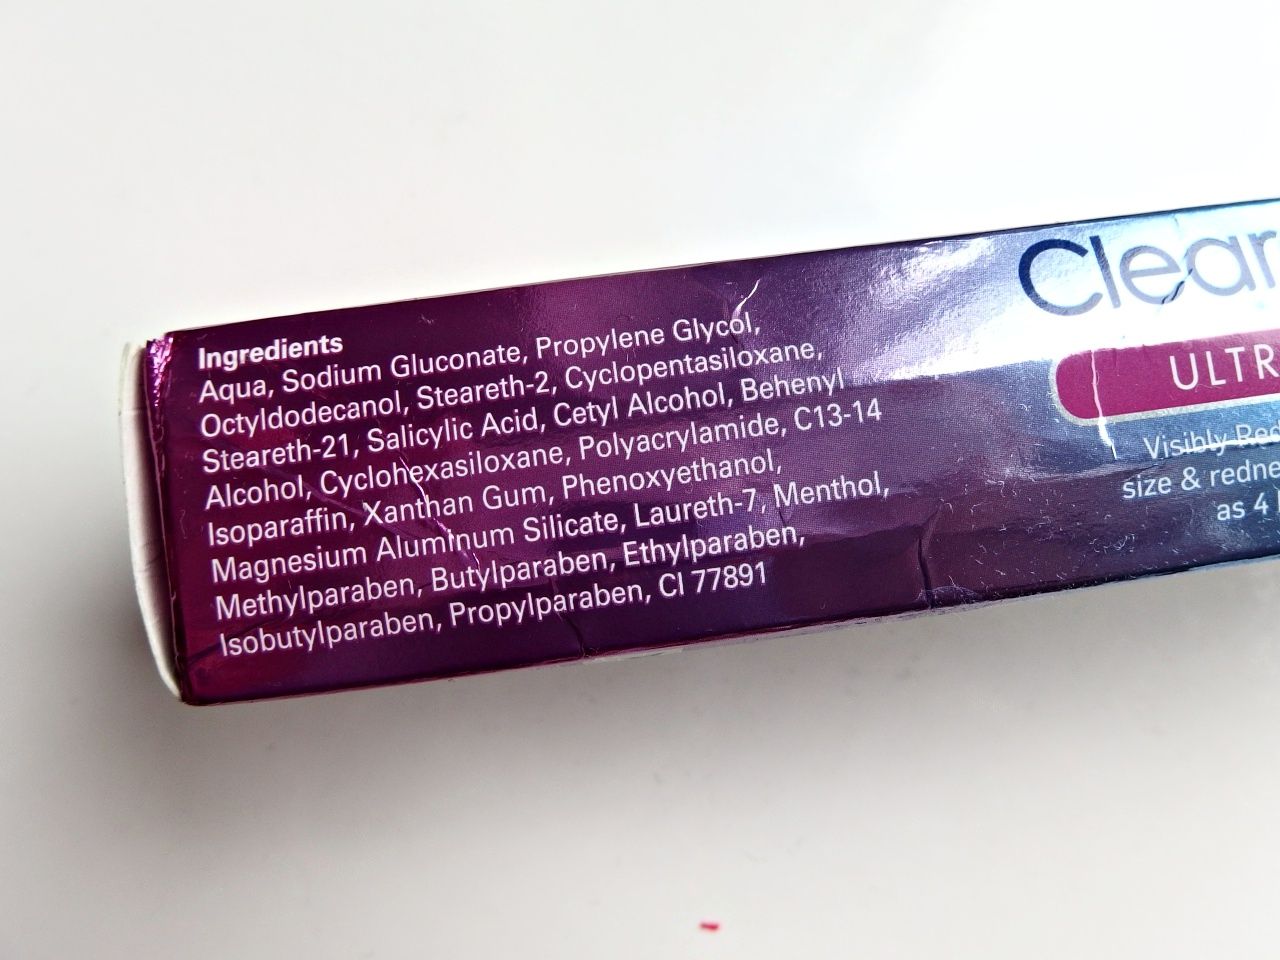 Clearasil Rapid Action Treatment Cream Review